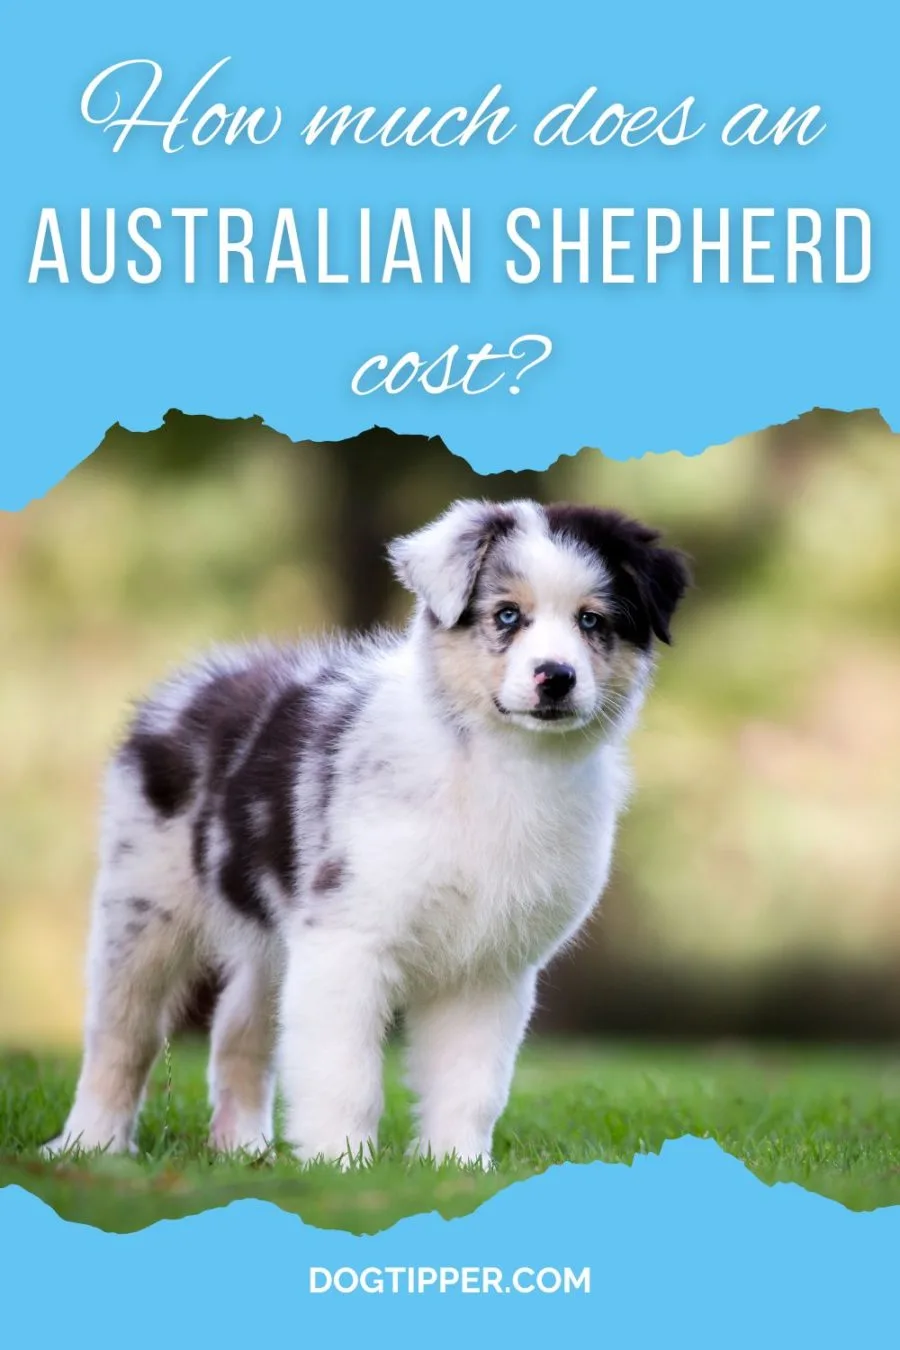 What is the cost of an Australian Shepherd puppy?